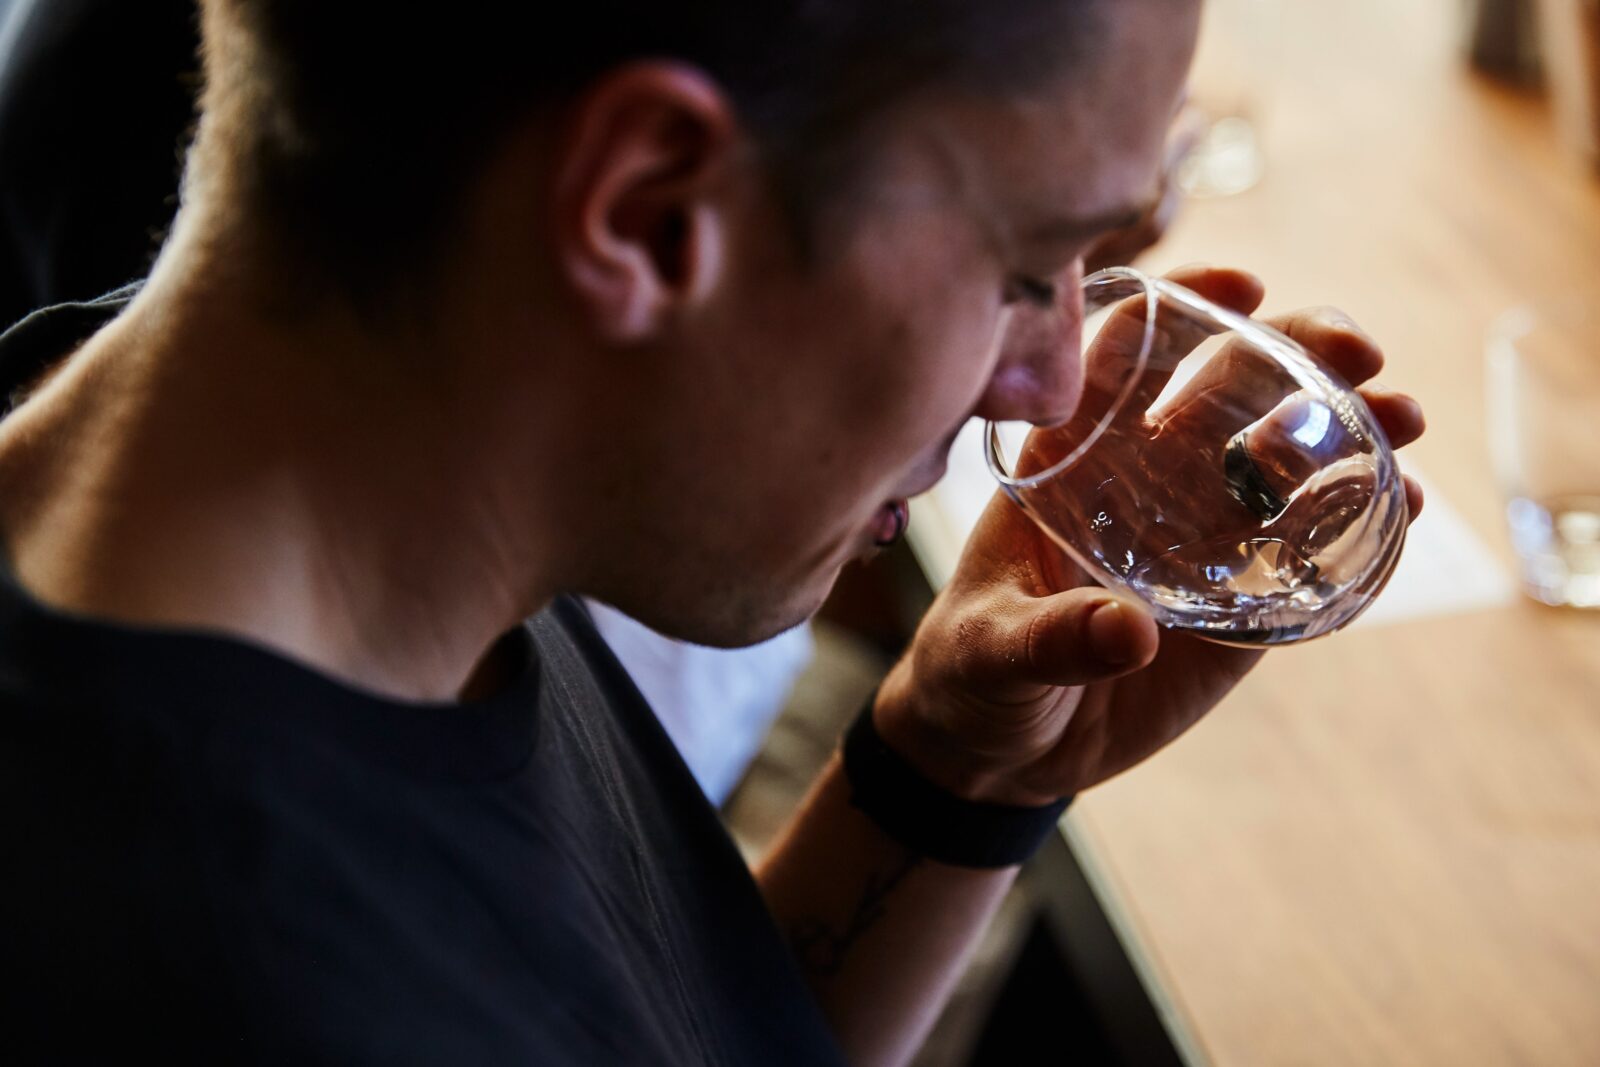 Guest smelling gin during tasting